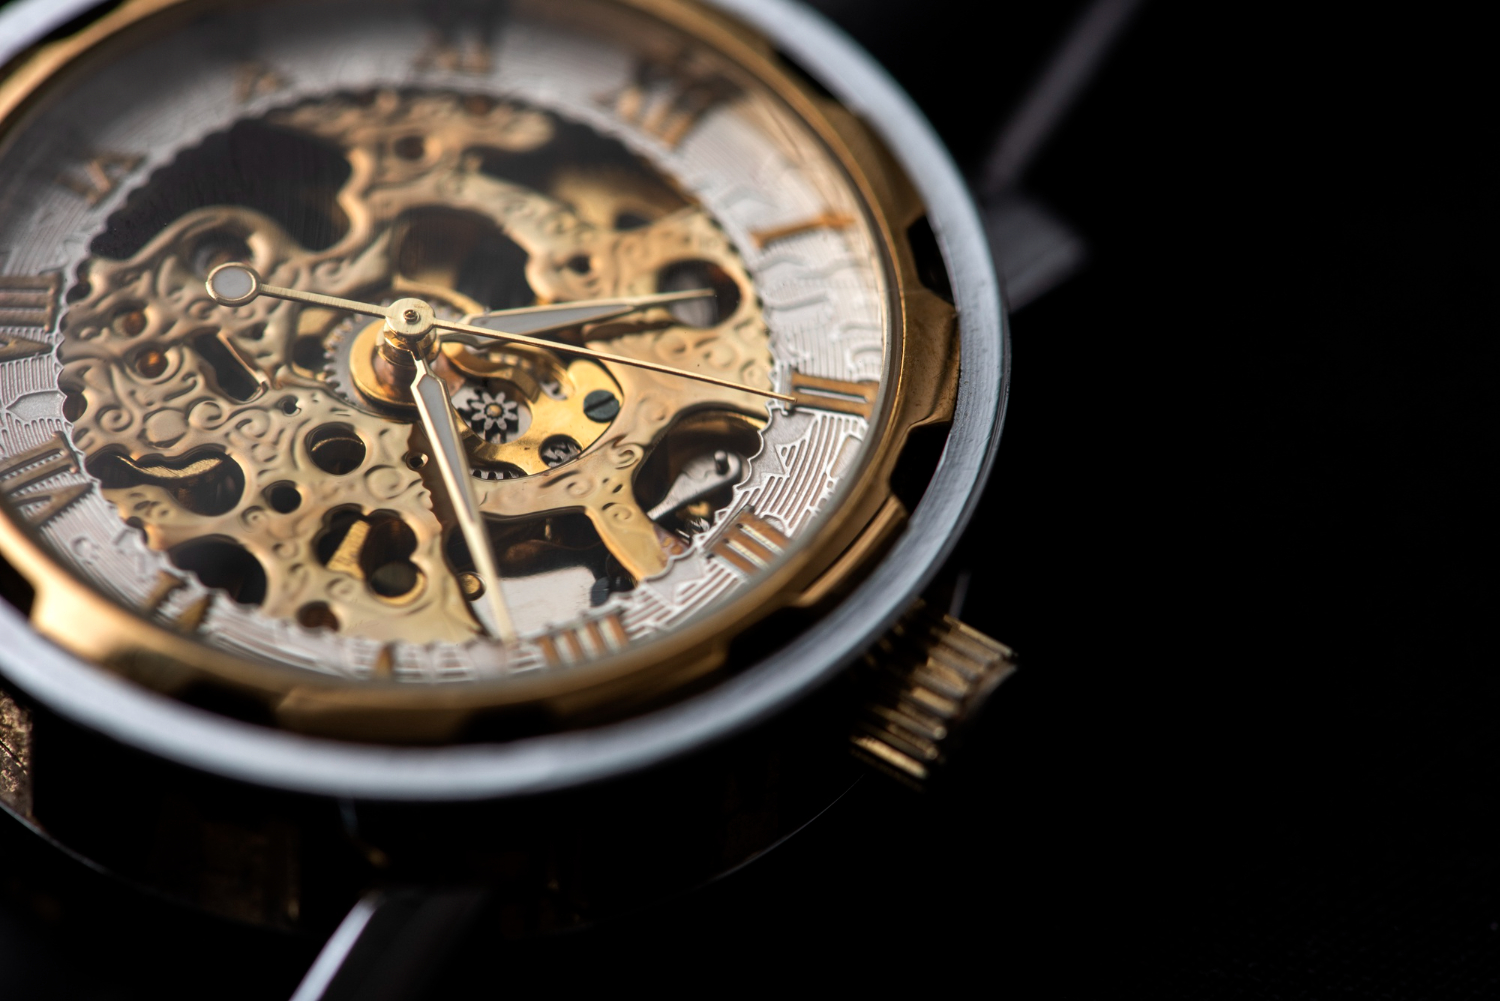 How Often Should You Service A Vintage Watch?